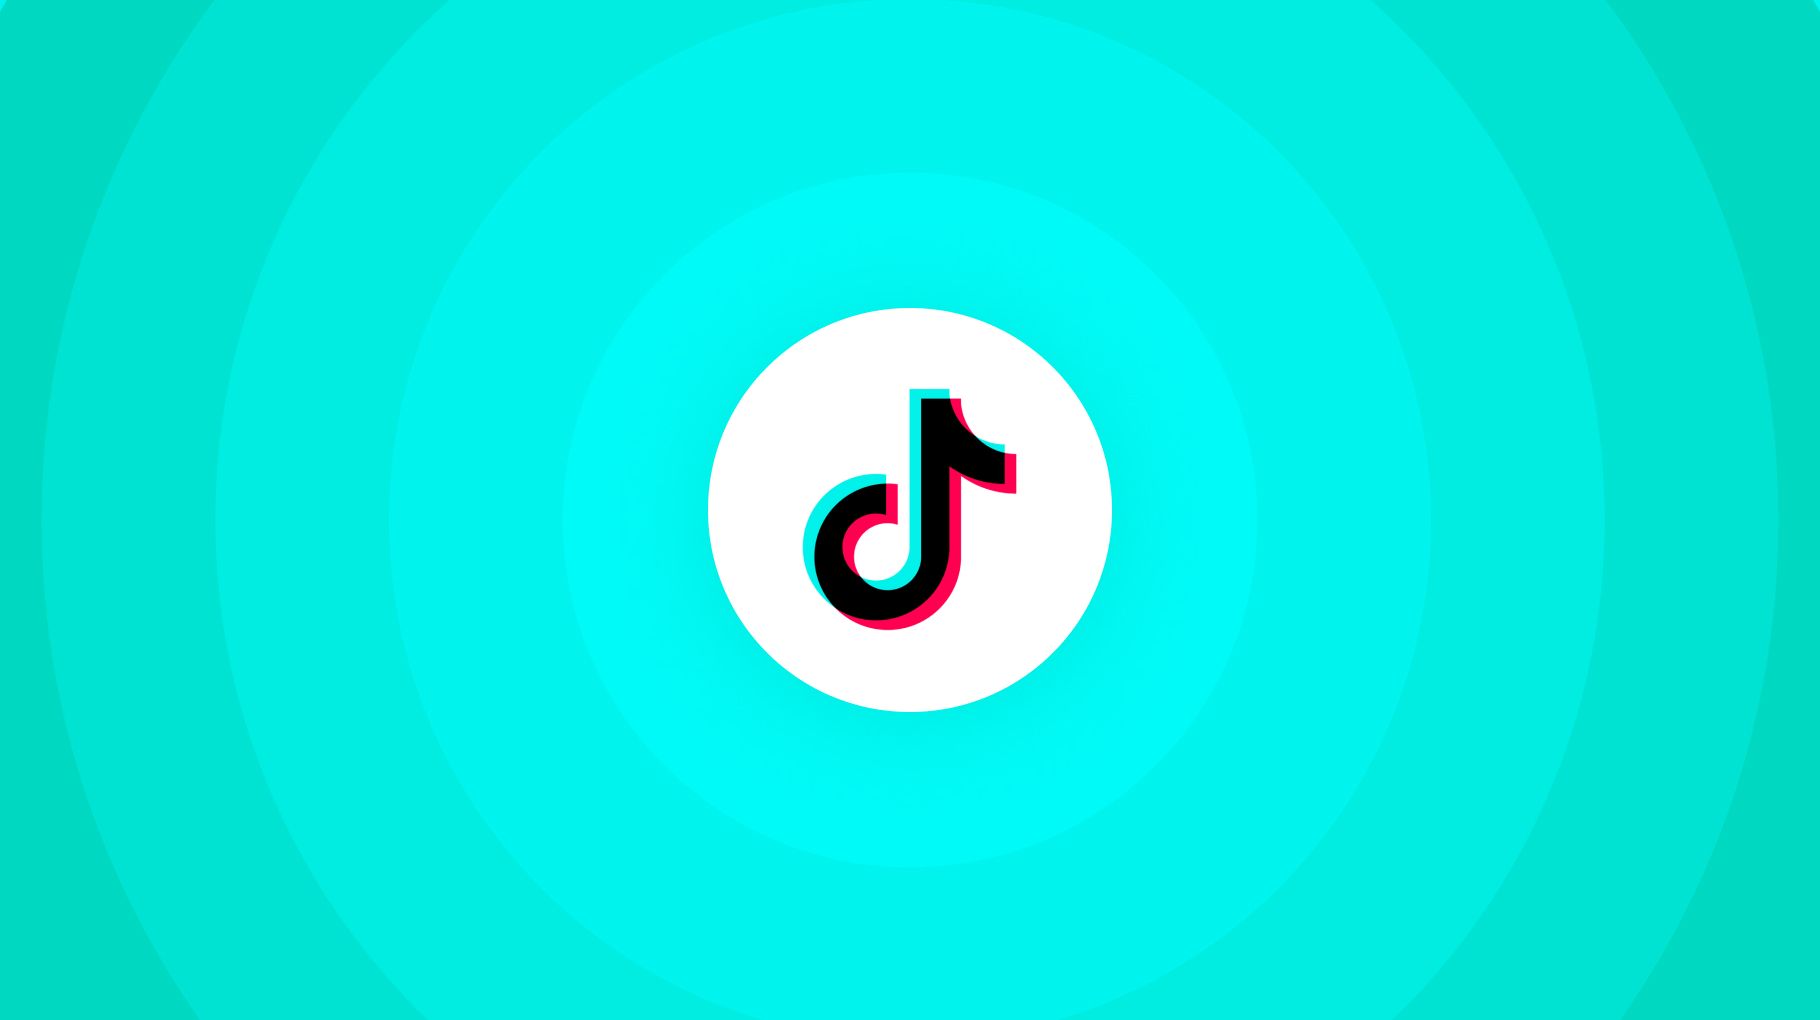 Demographics and Usage Time of TikTok in the UK